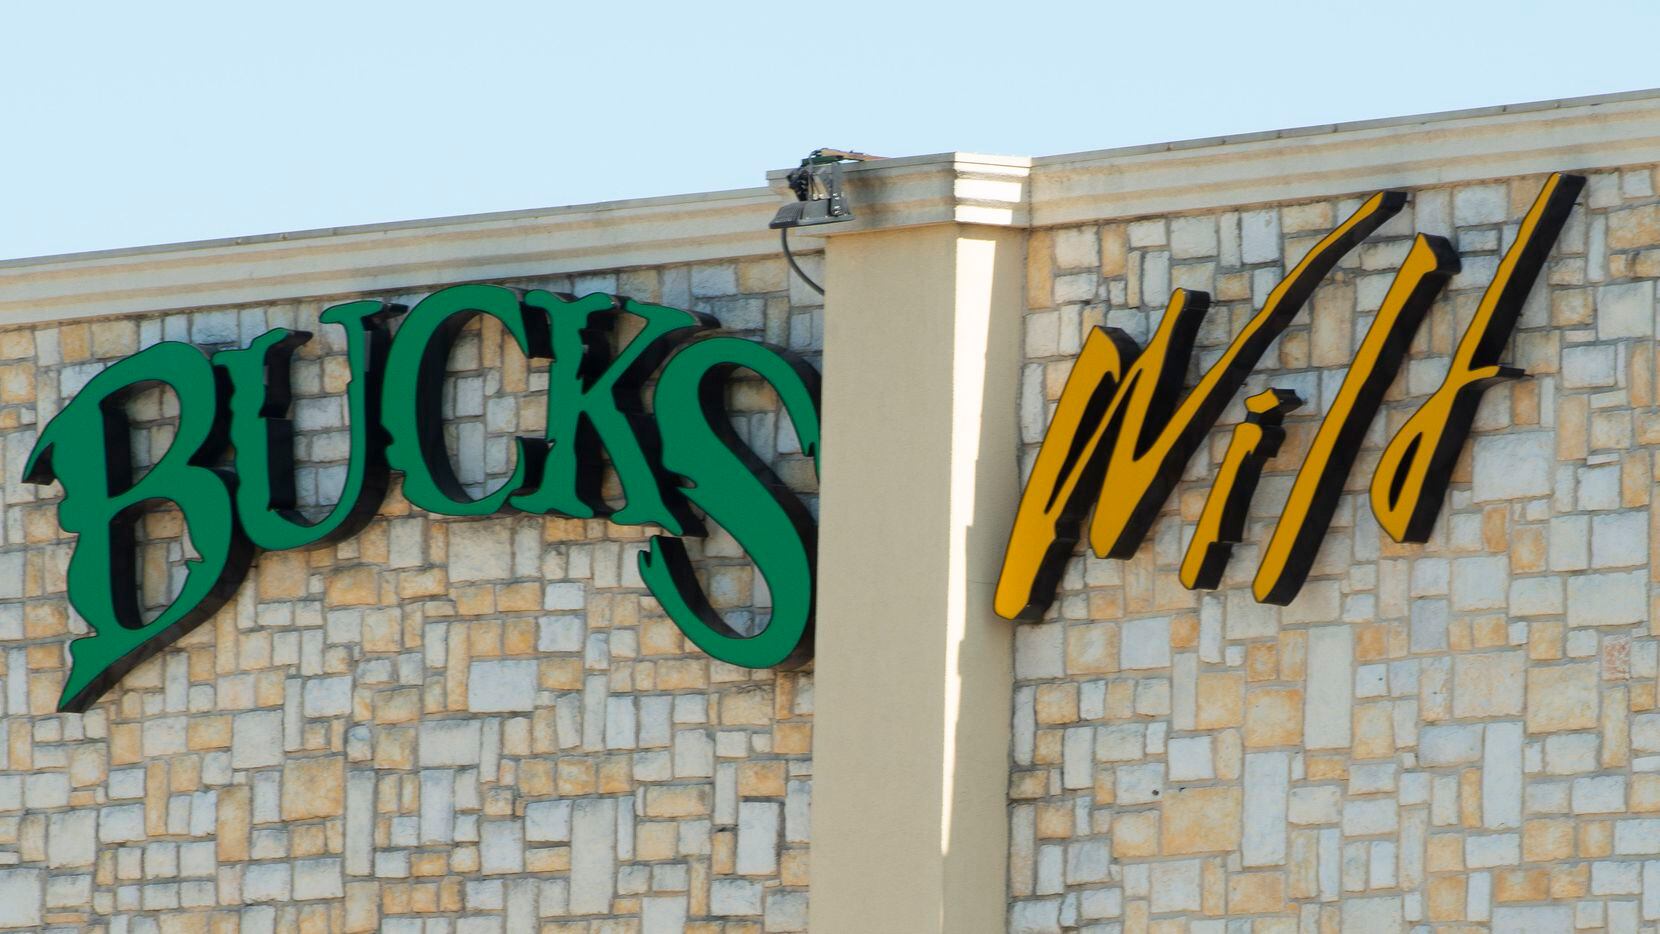 Bucks Wild strip club at 5316 Superior Parkway on May 6, 2020 in Fort Worth is su...